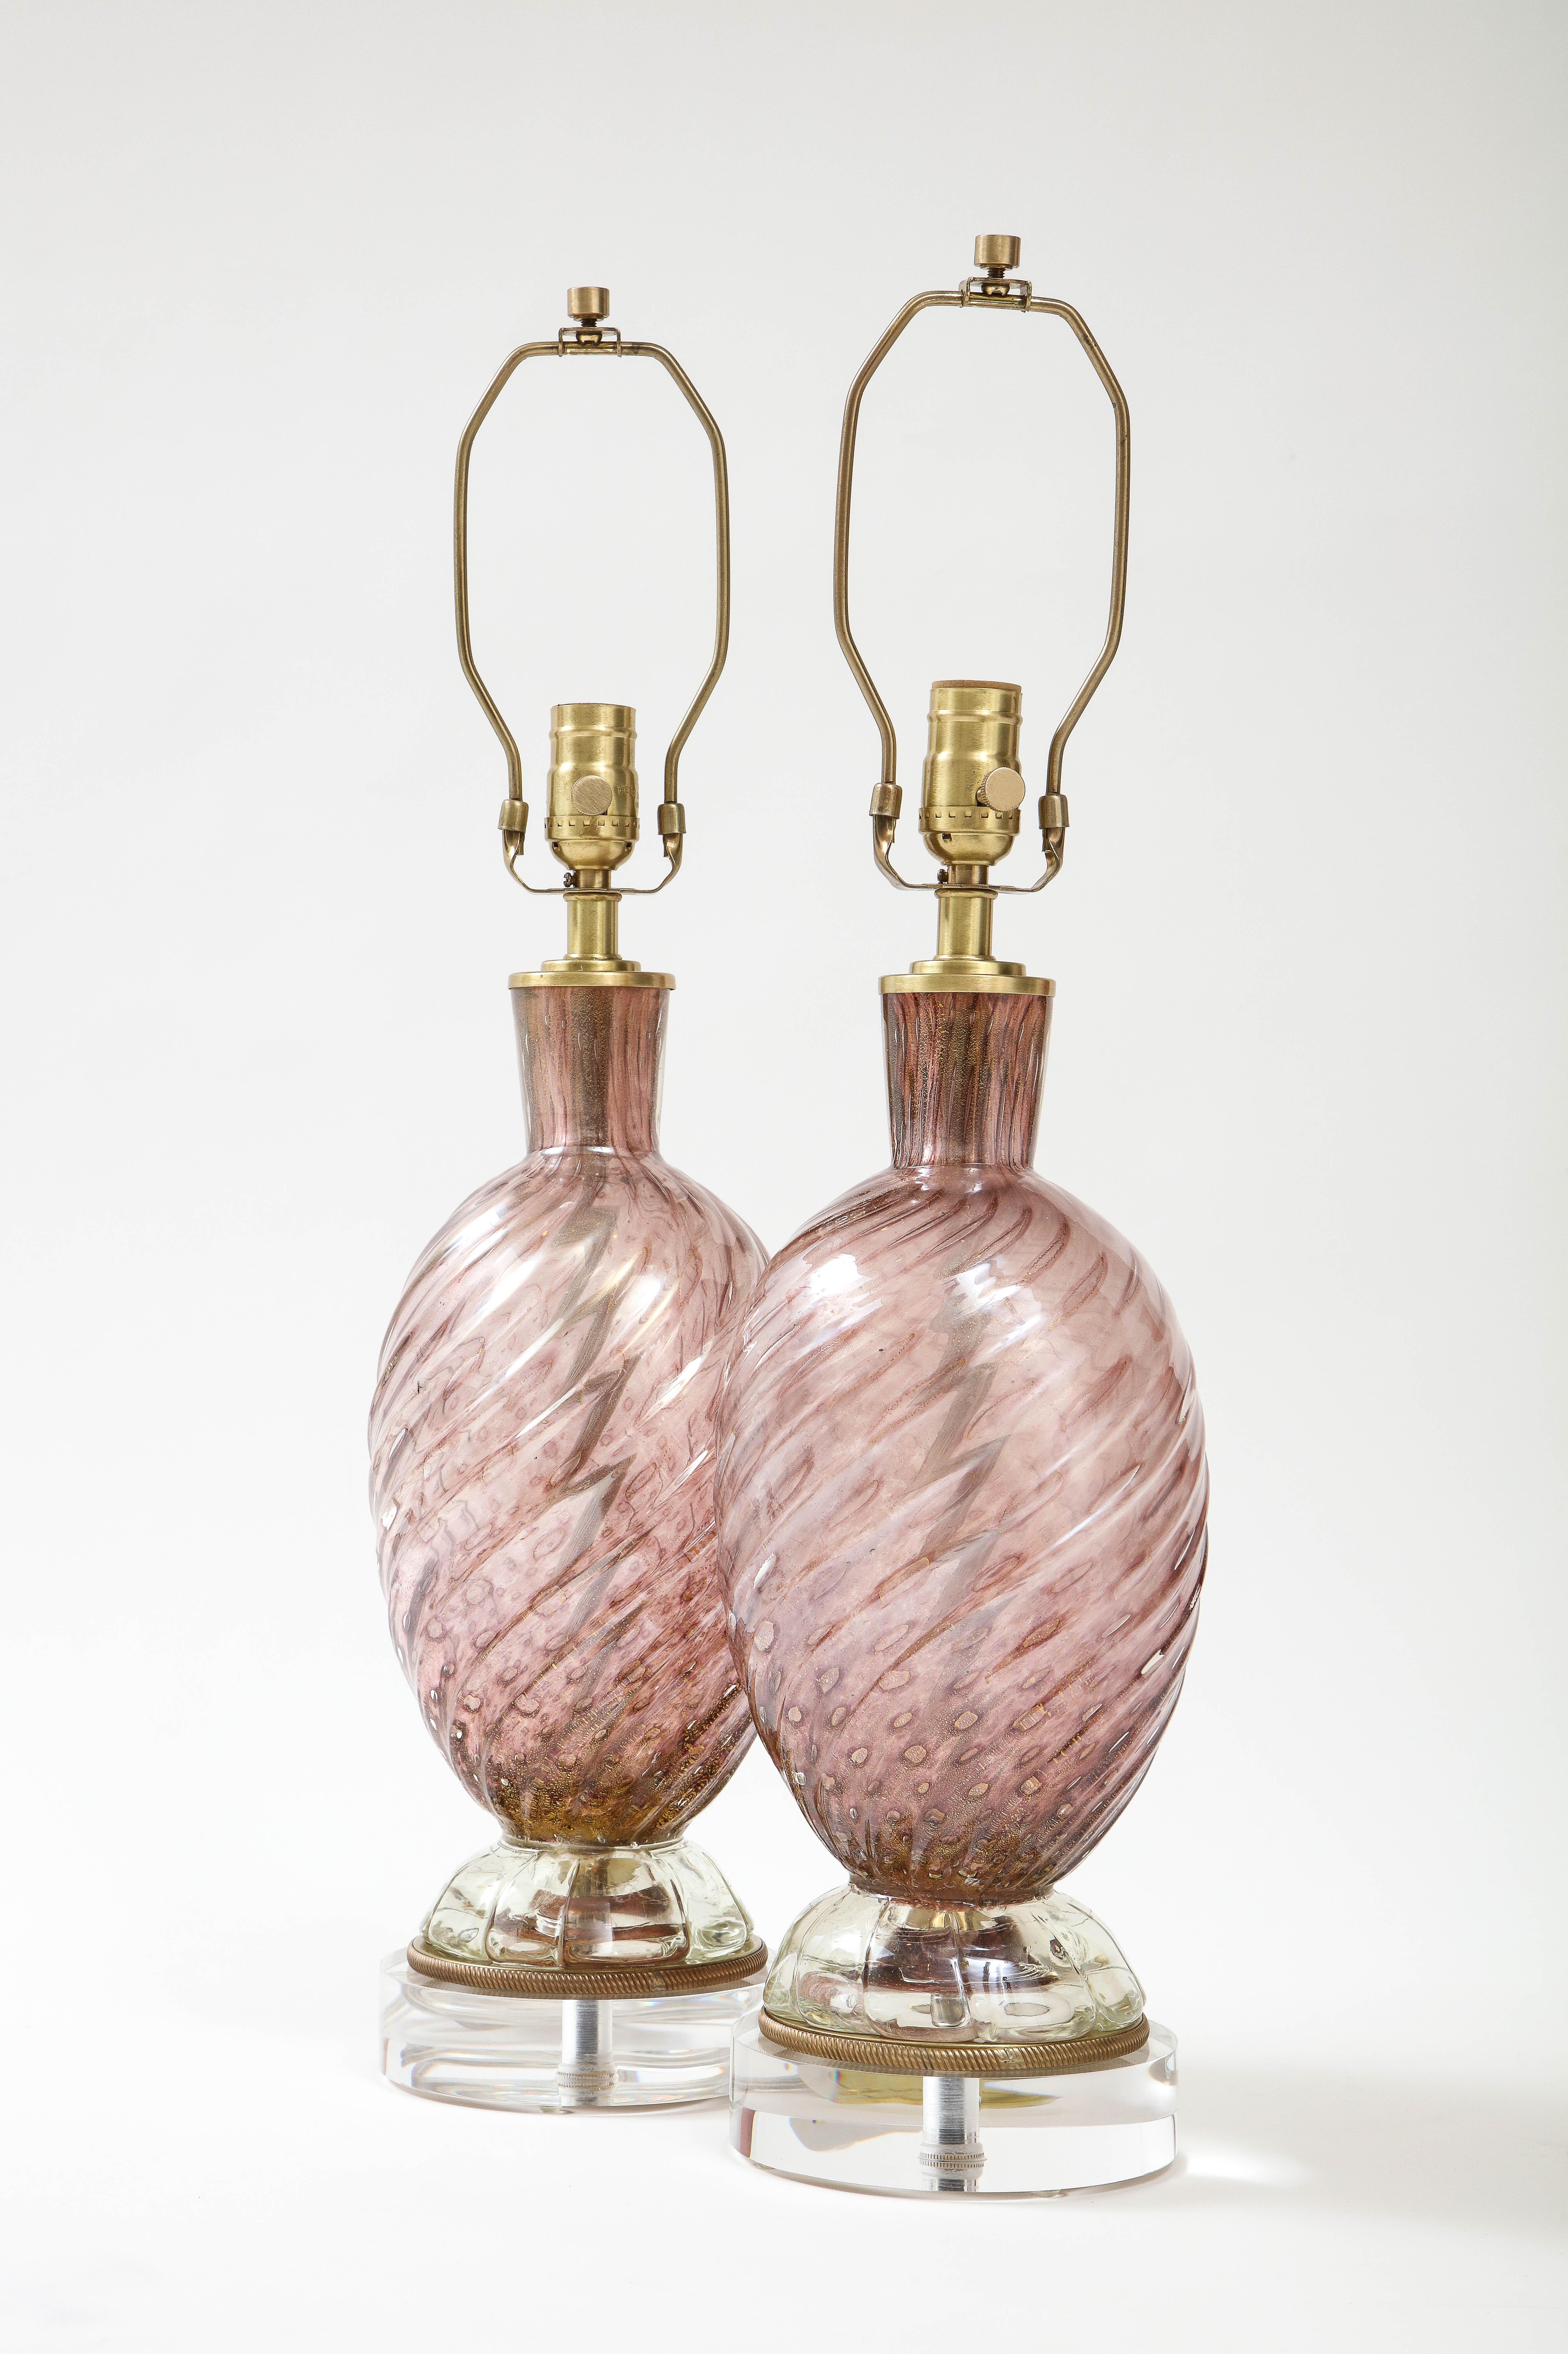 Pair of Smoked Amethyst Murano Glass lamps featuring a swirled design and gold dust inclusions throughout. Lamps sit on satin brass and Lucite bases. Rewired for use in the USA, 100W max bulbs.